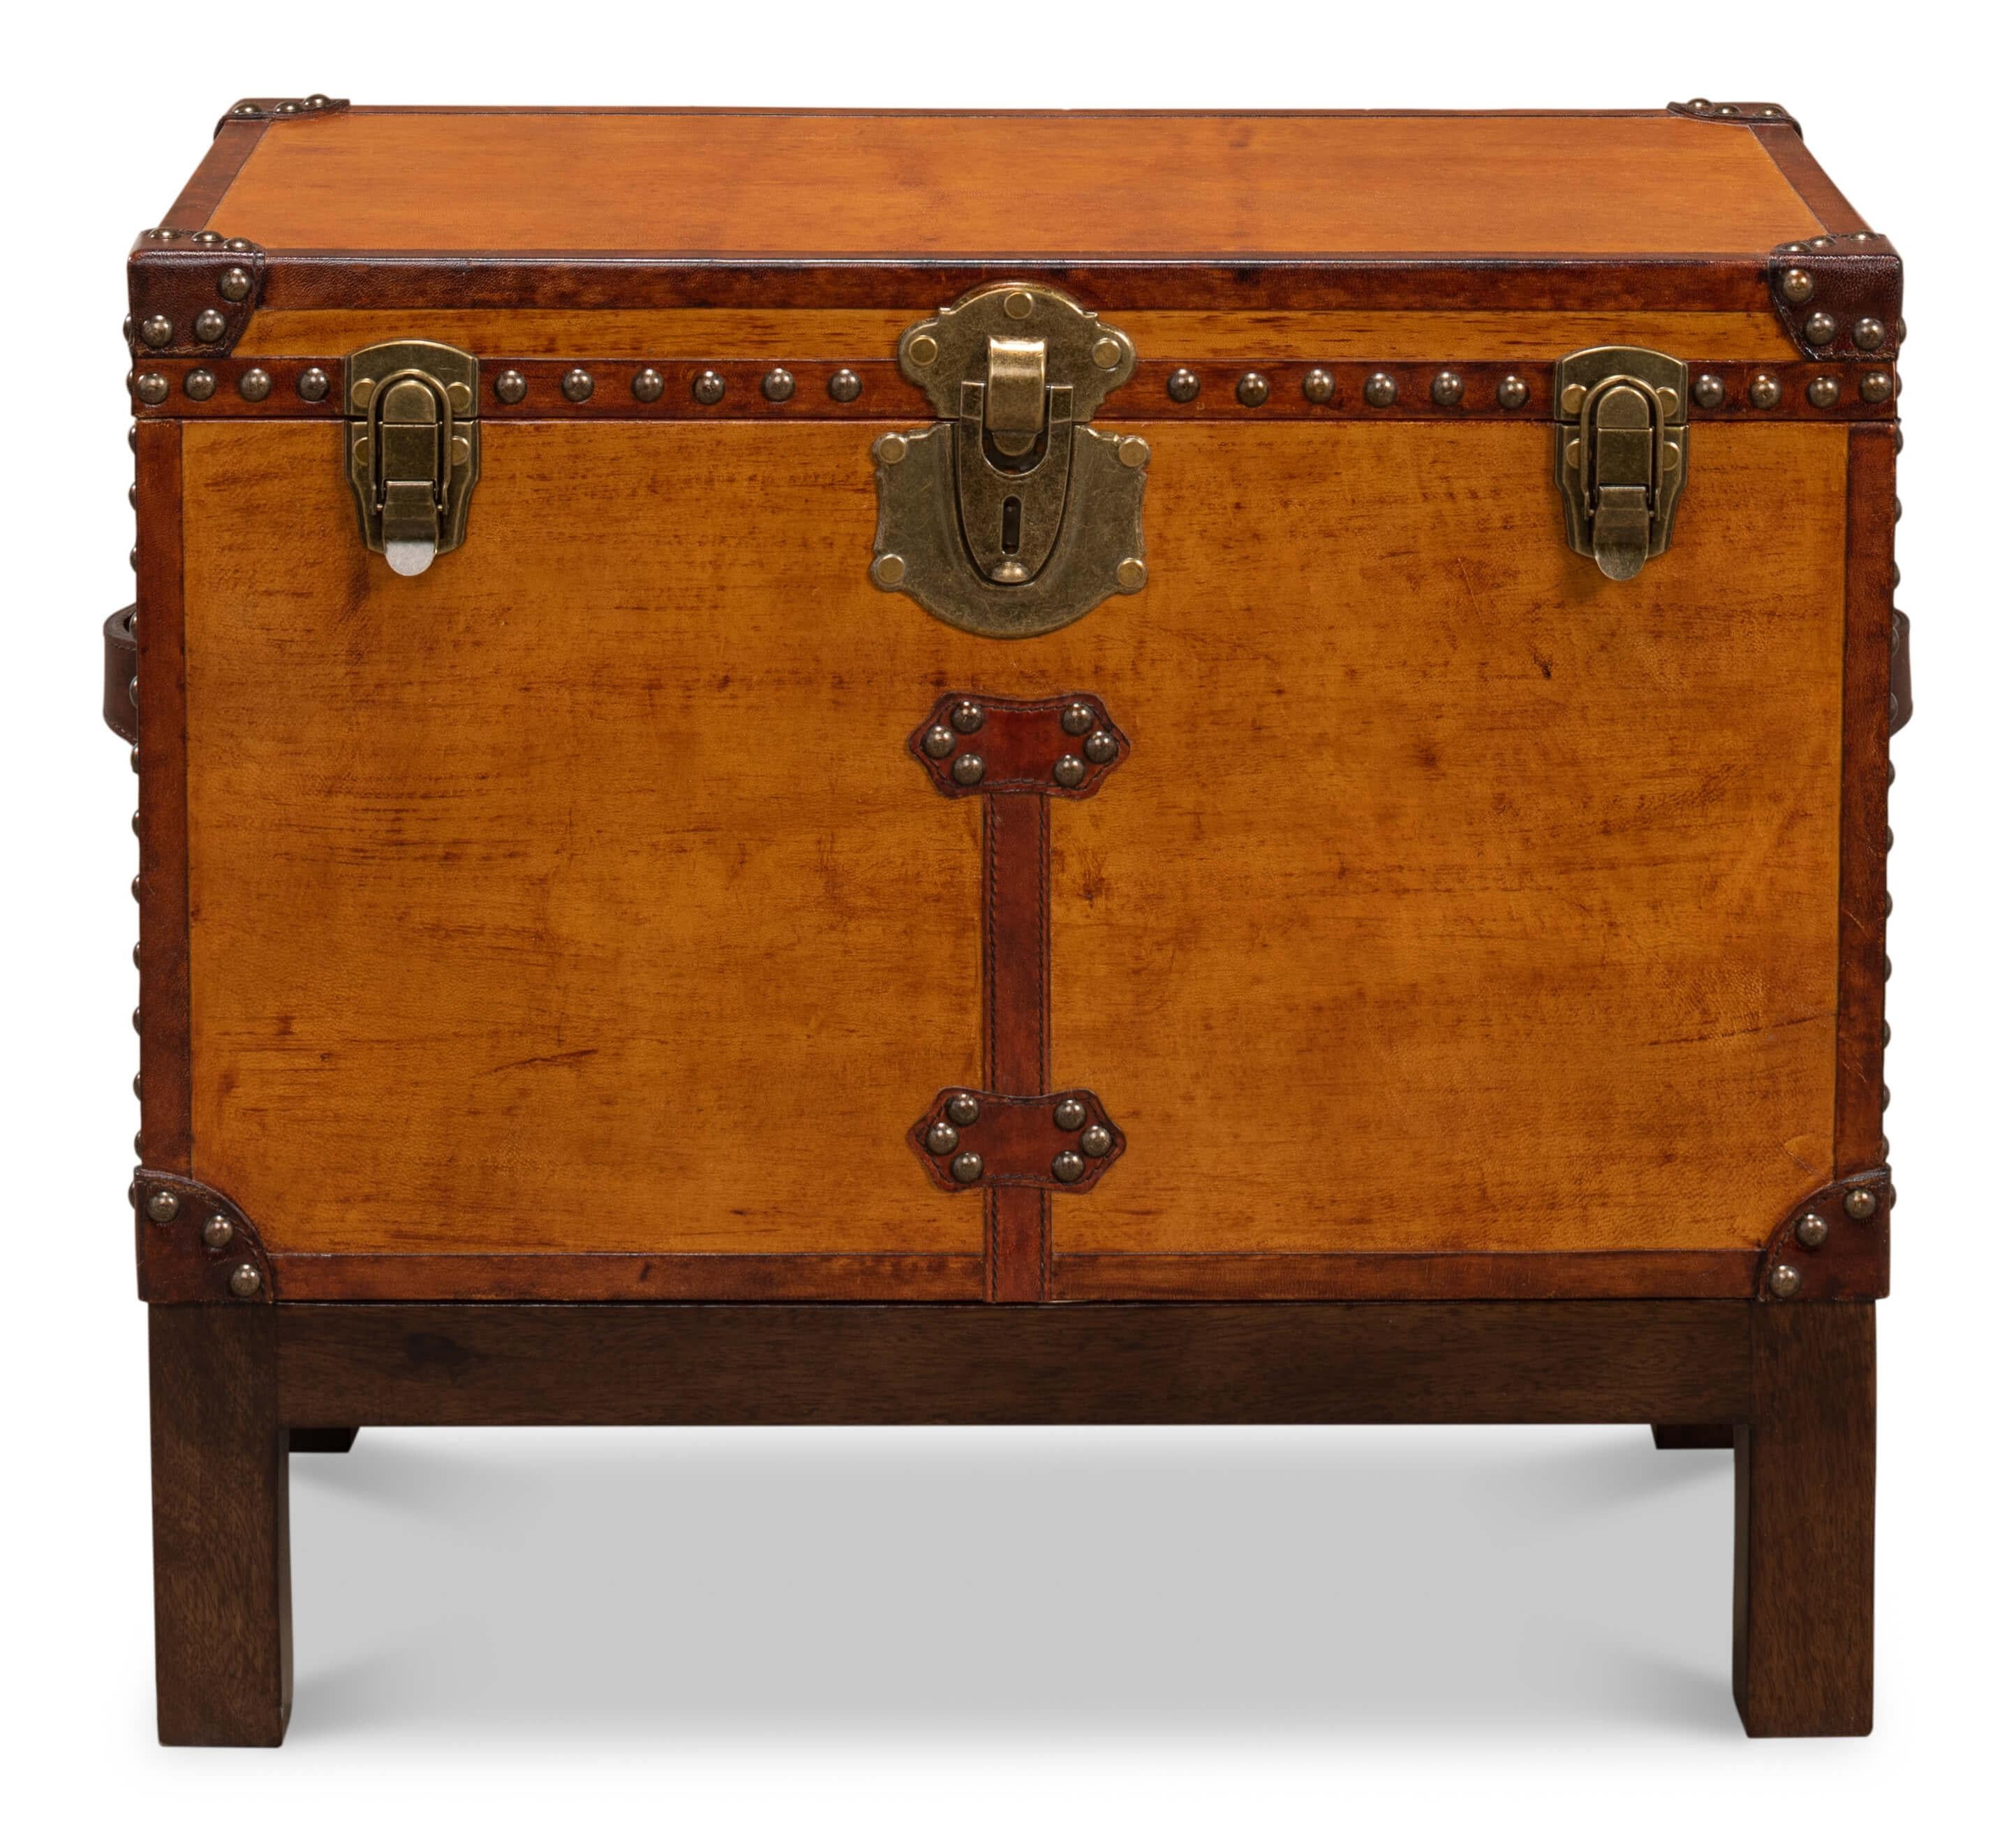 An English Campaign style decorative box on stand, this smaller wood box is beautifully detailed with brass tacks and hardware with leather accents. The interior of the box is lined with decorative paper. It rests on a wood stand. 

Dimensions: